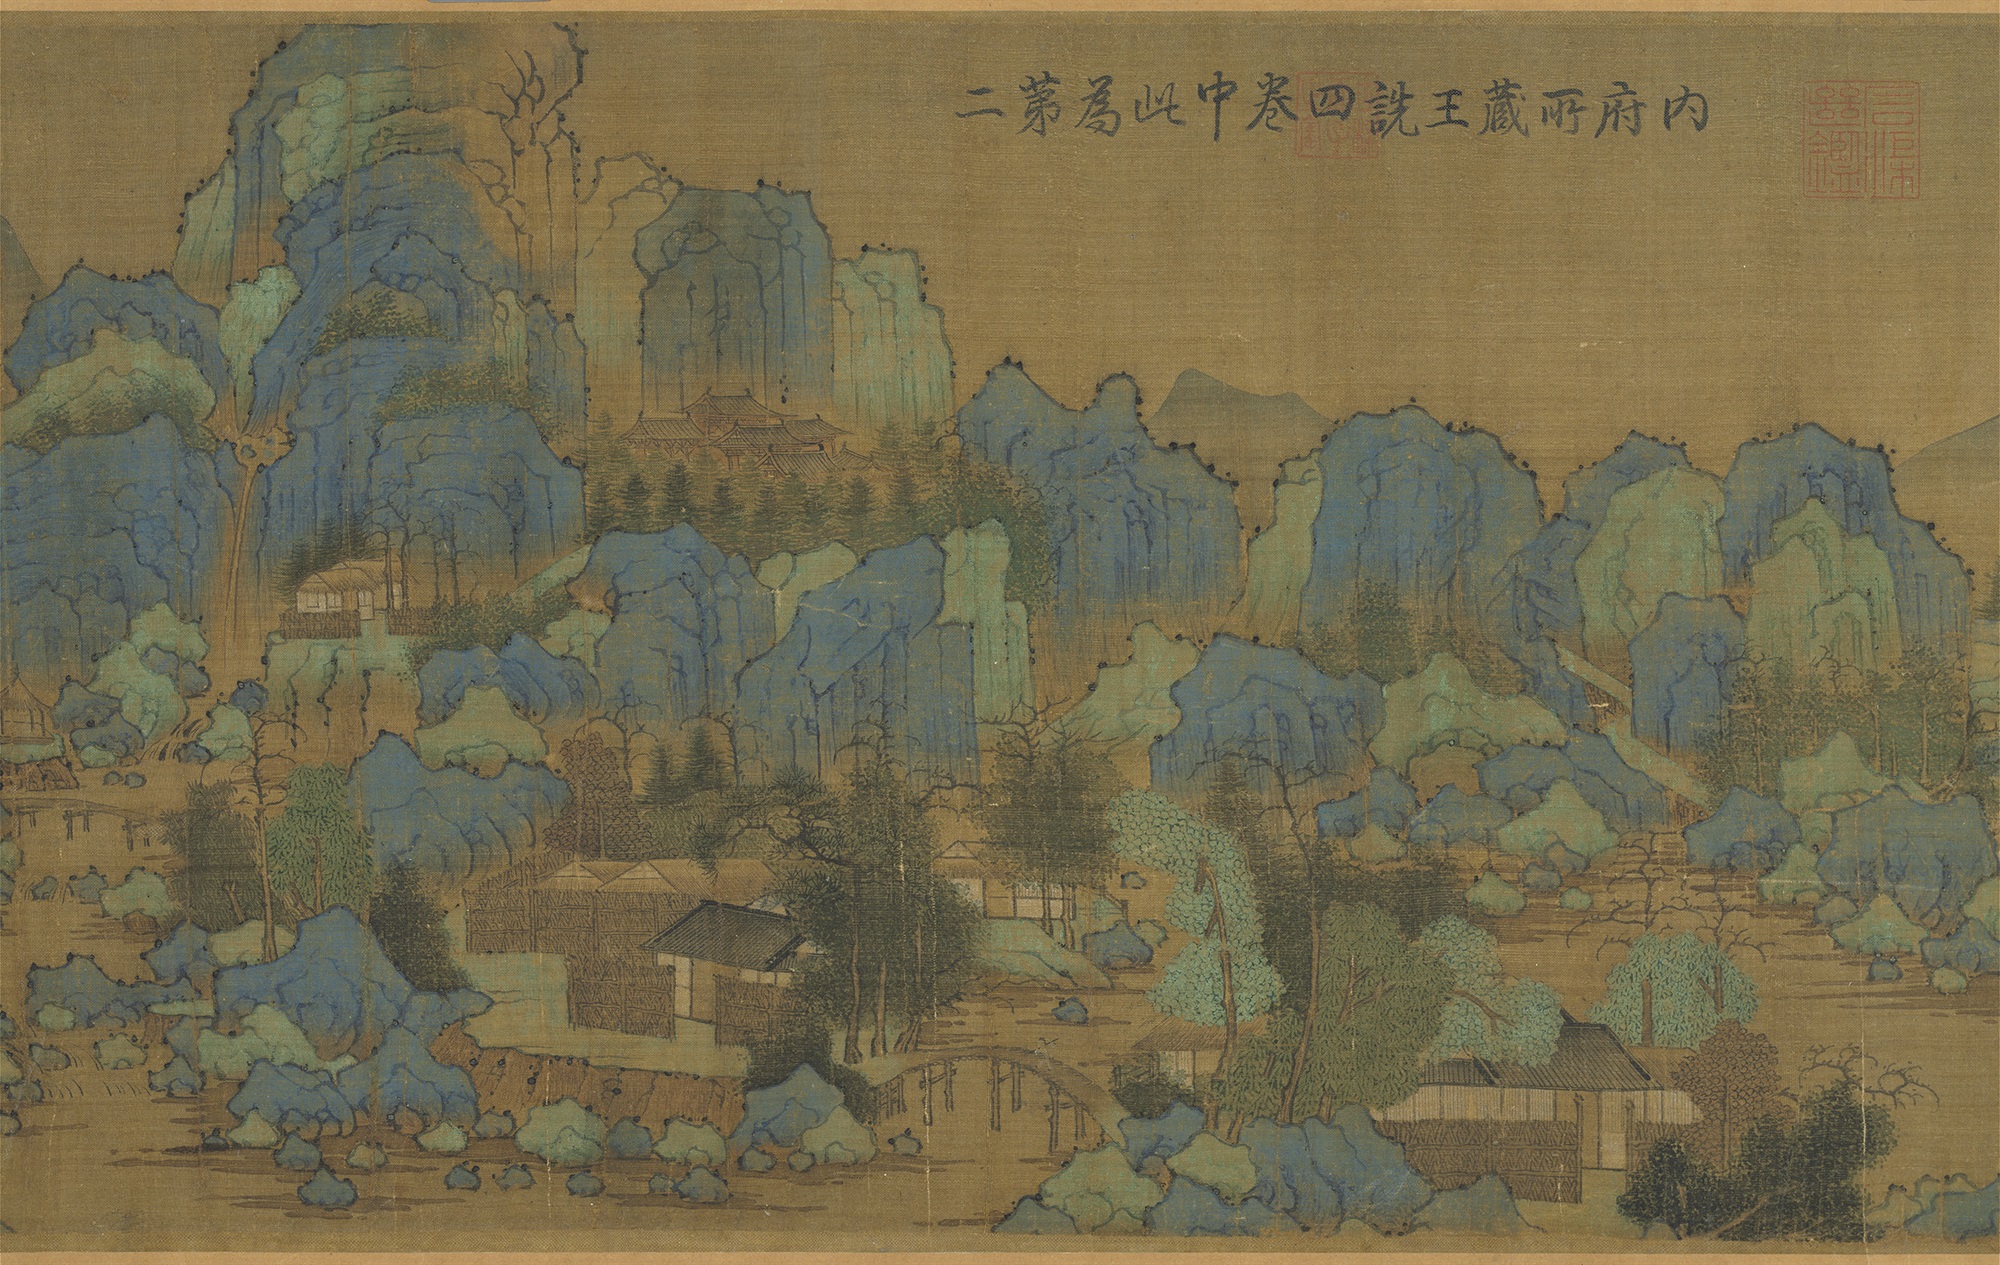 Painting of Mount Ying Attributred to Wang Shenpreview